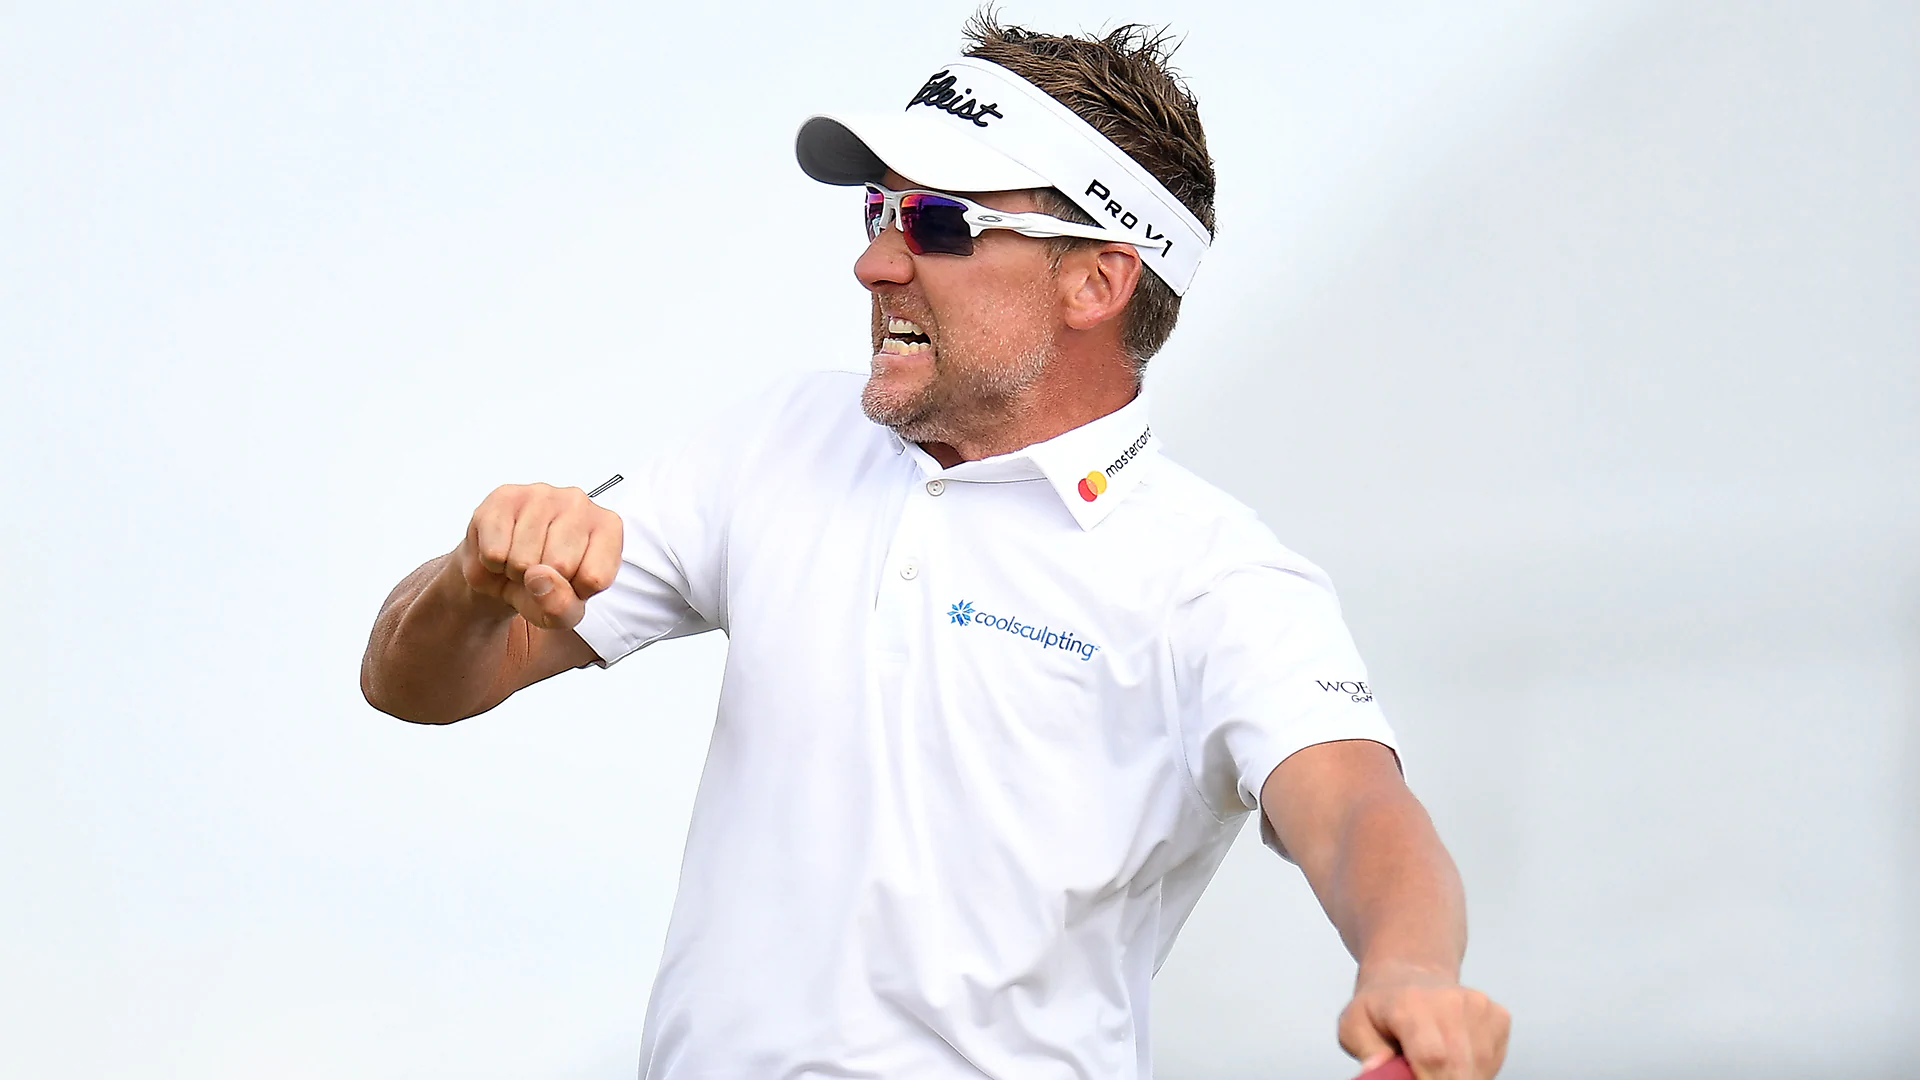 Watch: Poulter's 20-foot birdie on 72nd hole forces playoff